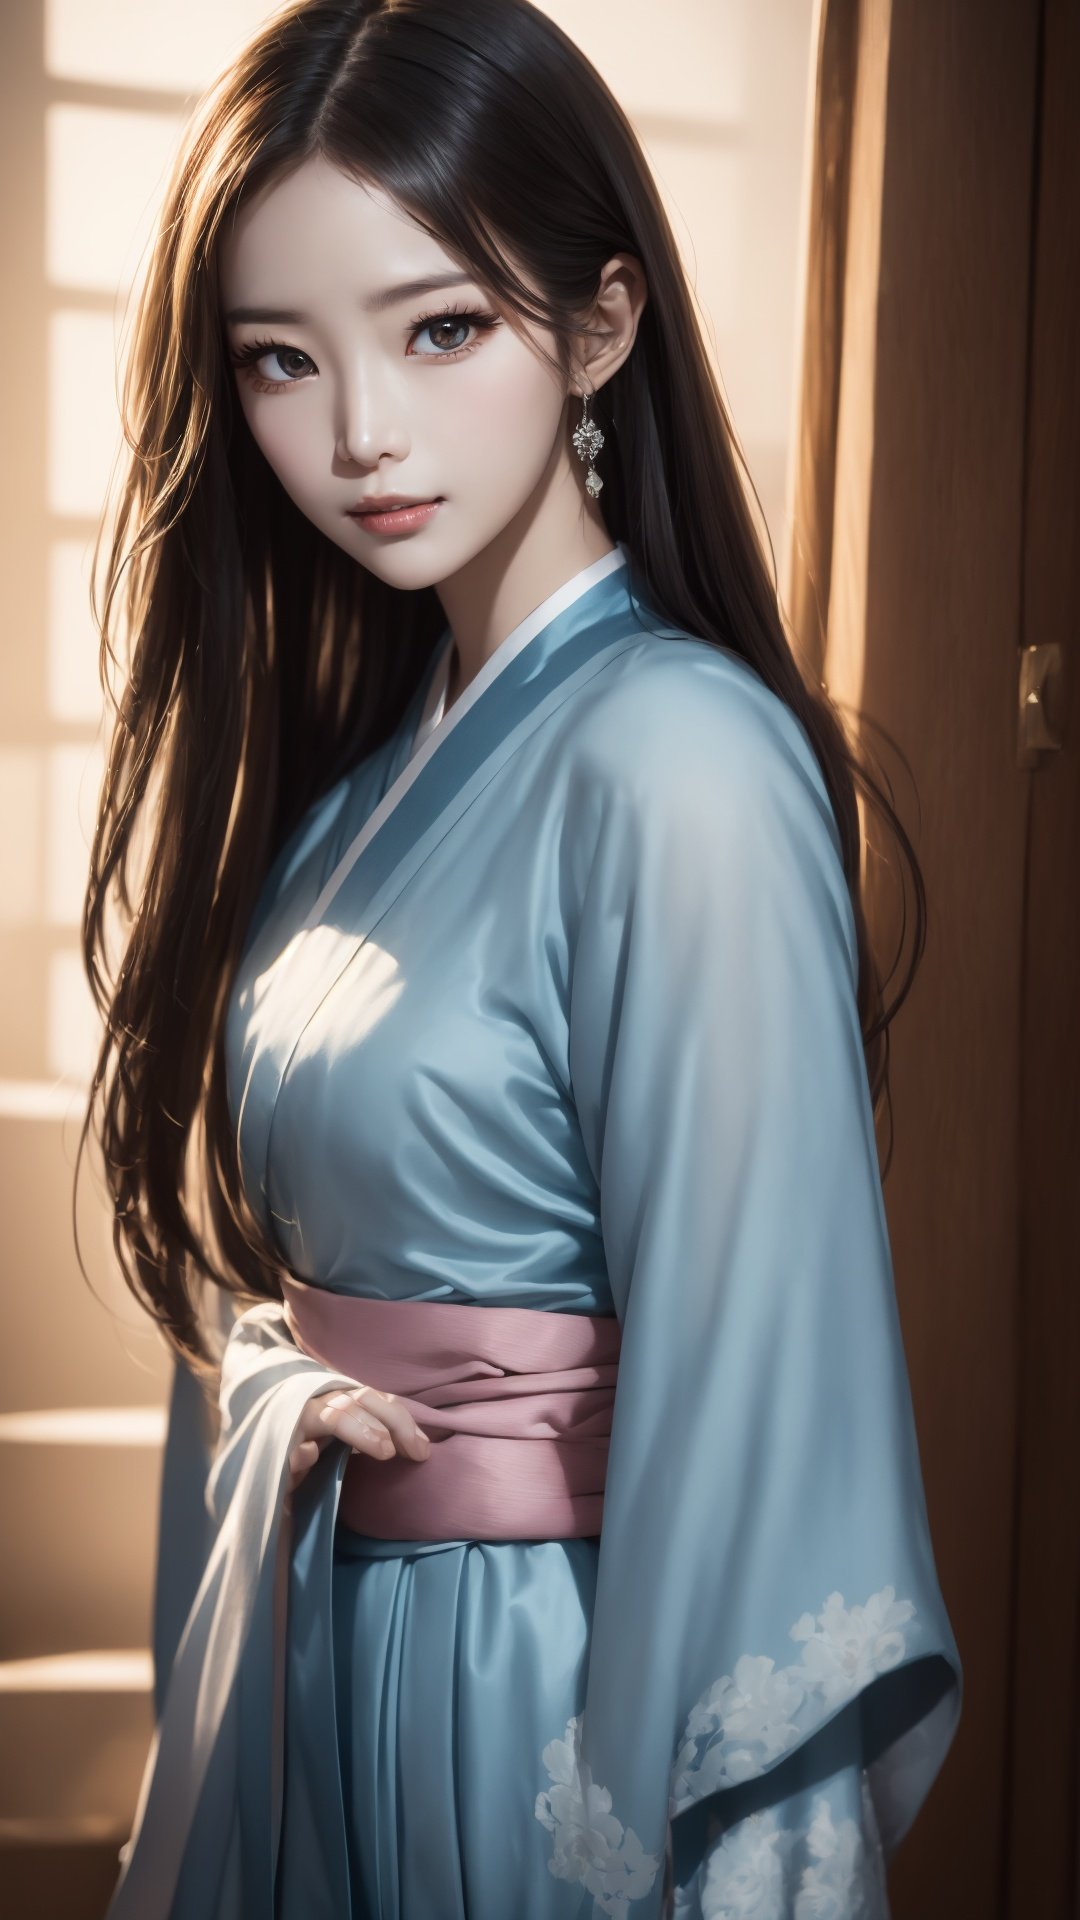 best quality,4k,8k,highres,masterpiece:1.2,ultra-detailed,realistic,photorealistic:1.37,portrait,Korean sexy woman,dark background,piercing eyes,sharp focus,soft lighting,vibrant colors,subtle makeup,long flowing hair,feminine curves,sensual pose,traditional hanbok,bold confidence,alluring gaze,modern interpretation,subtle elegance,graceful posture,understated beauty,delicate features,provocative charm,strong presence,confident smile,seductive aura,natural beauty,mesmerizing lips,intense expression,sublime artistry,fashion forward,contemporary allure,enticing allure,stunning visual impact